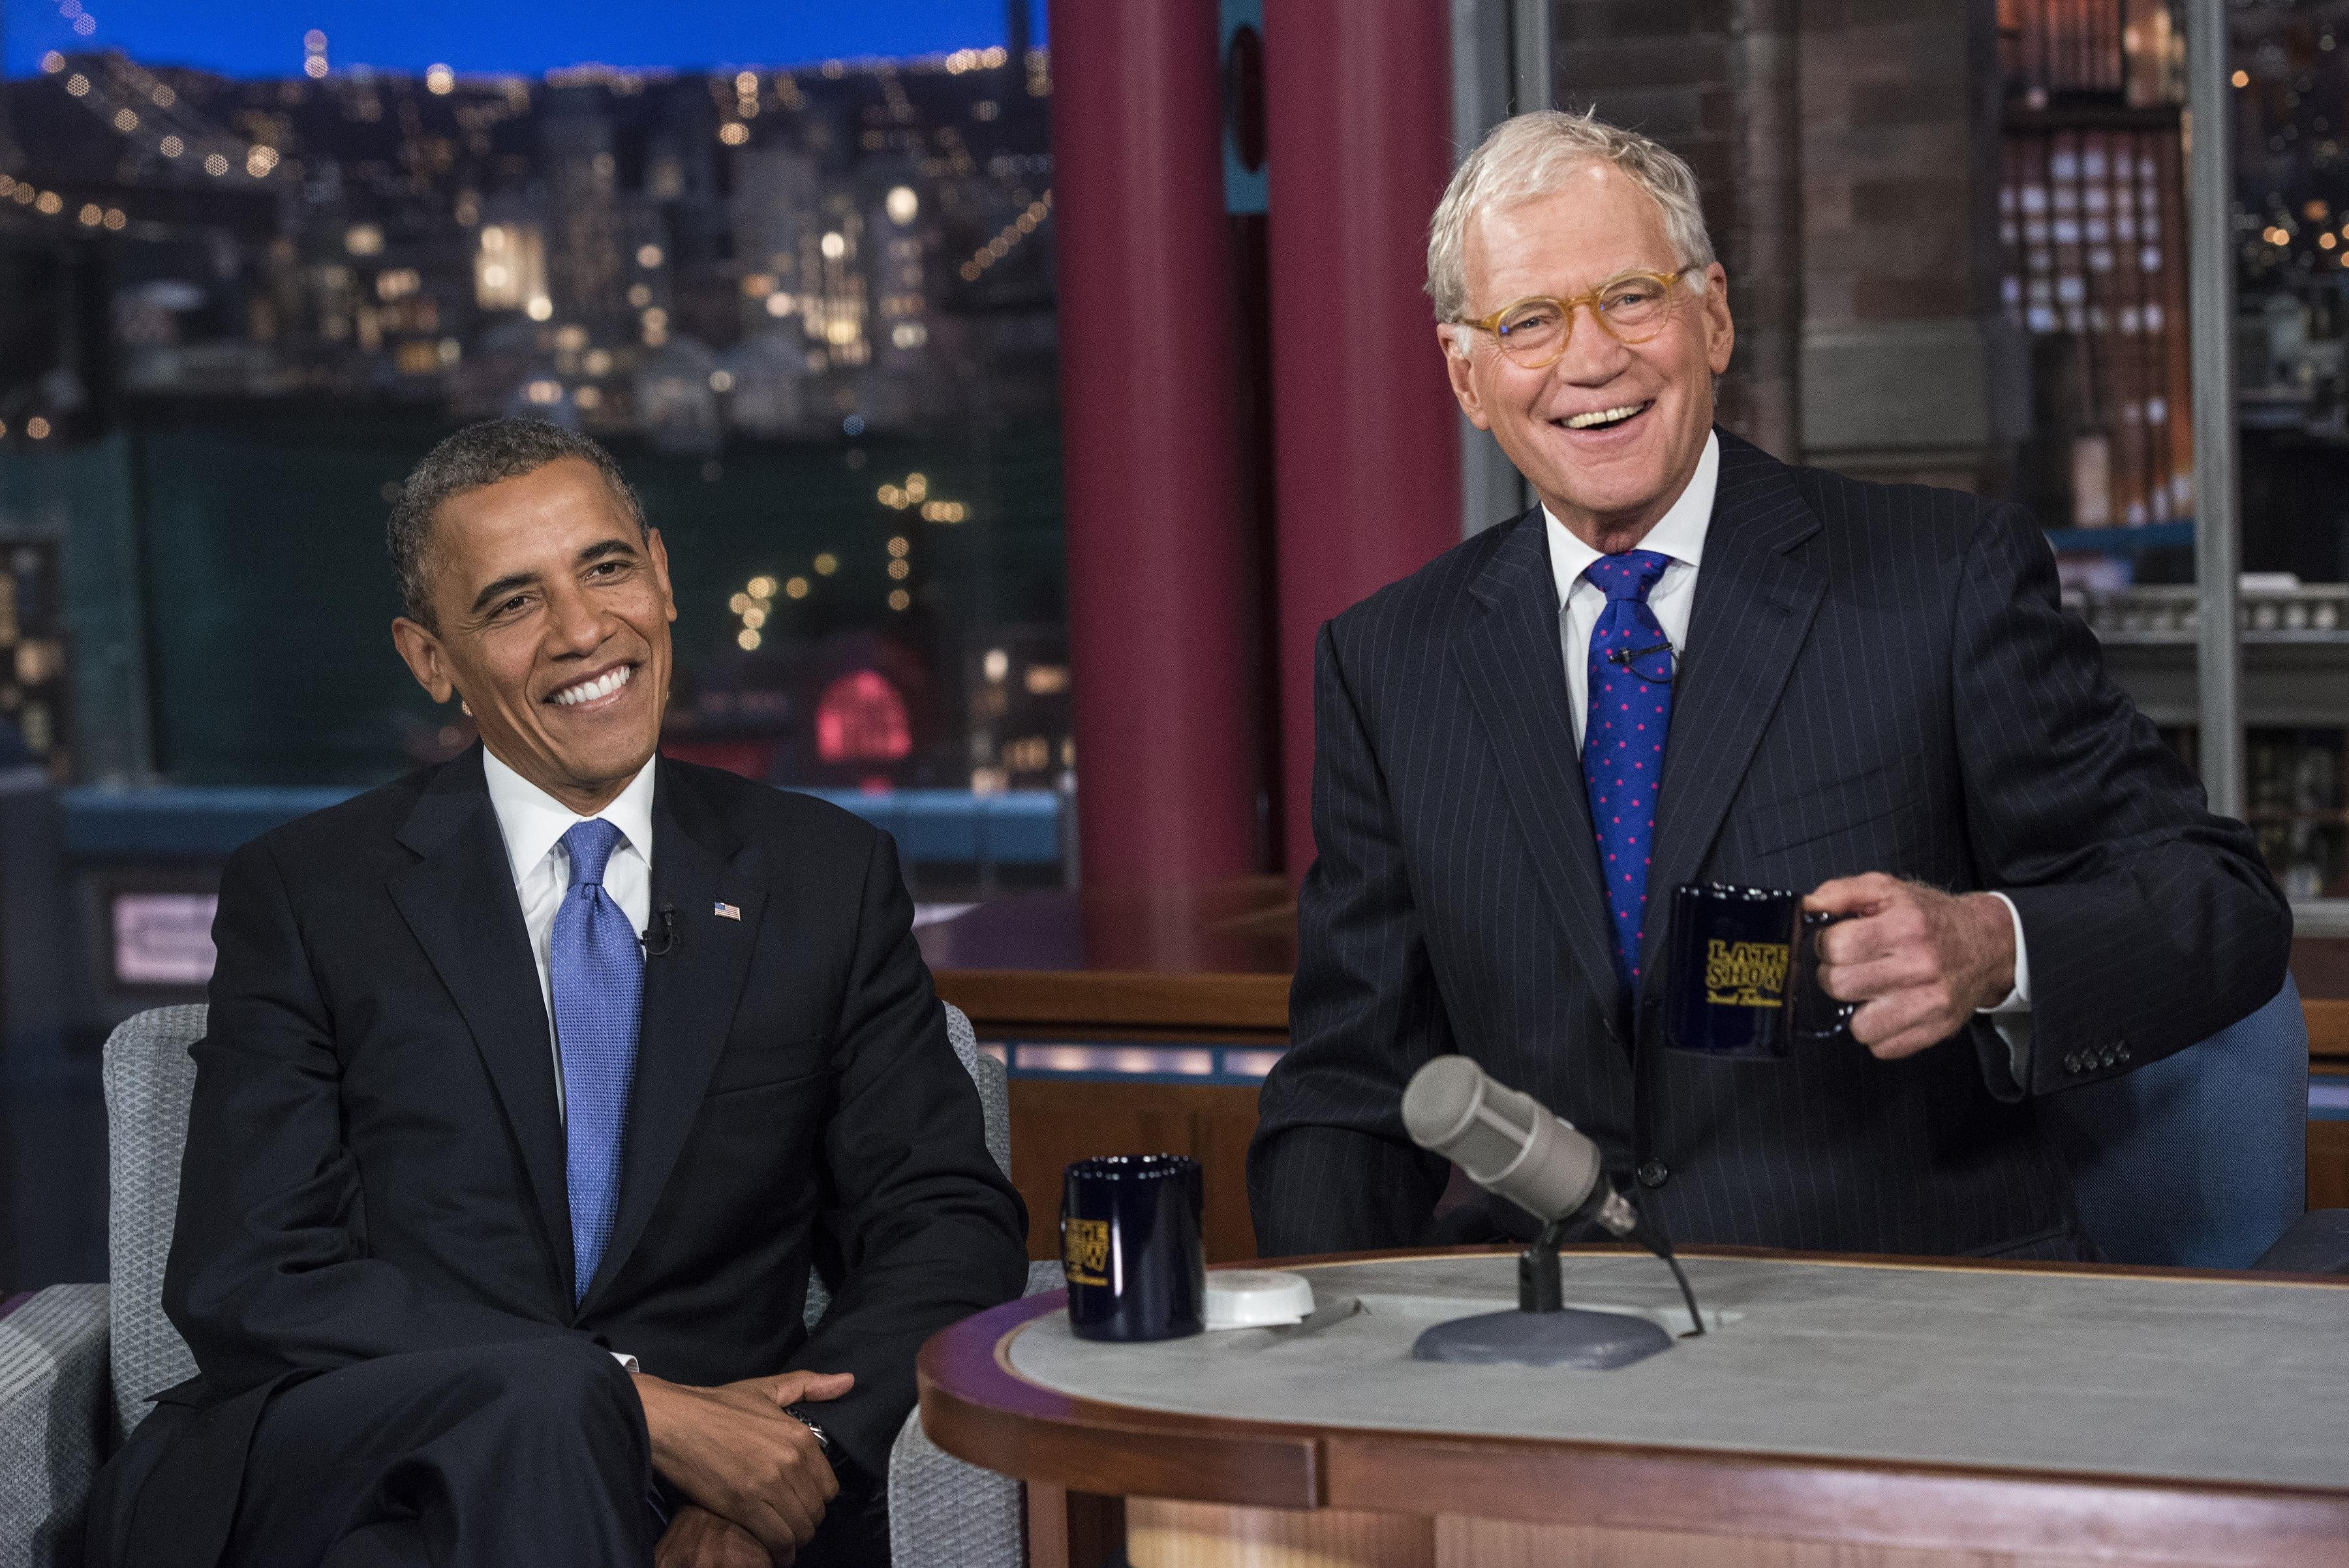 David Letterman hosts The Late Show